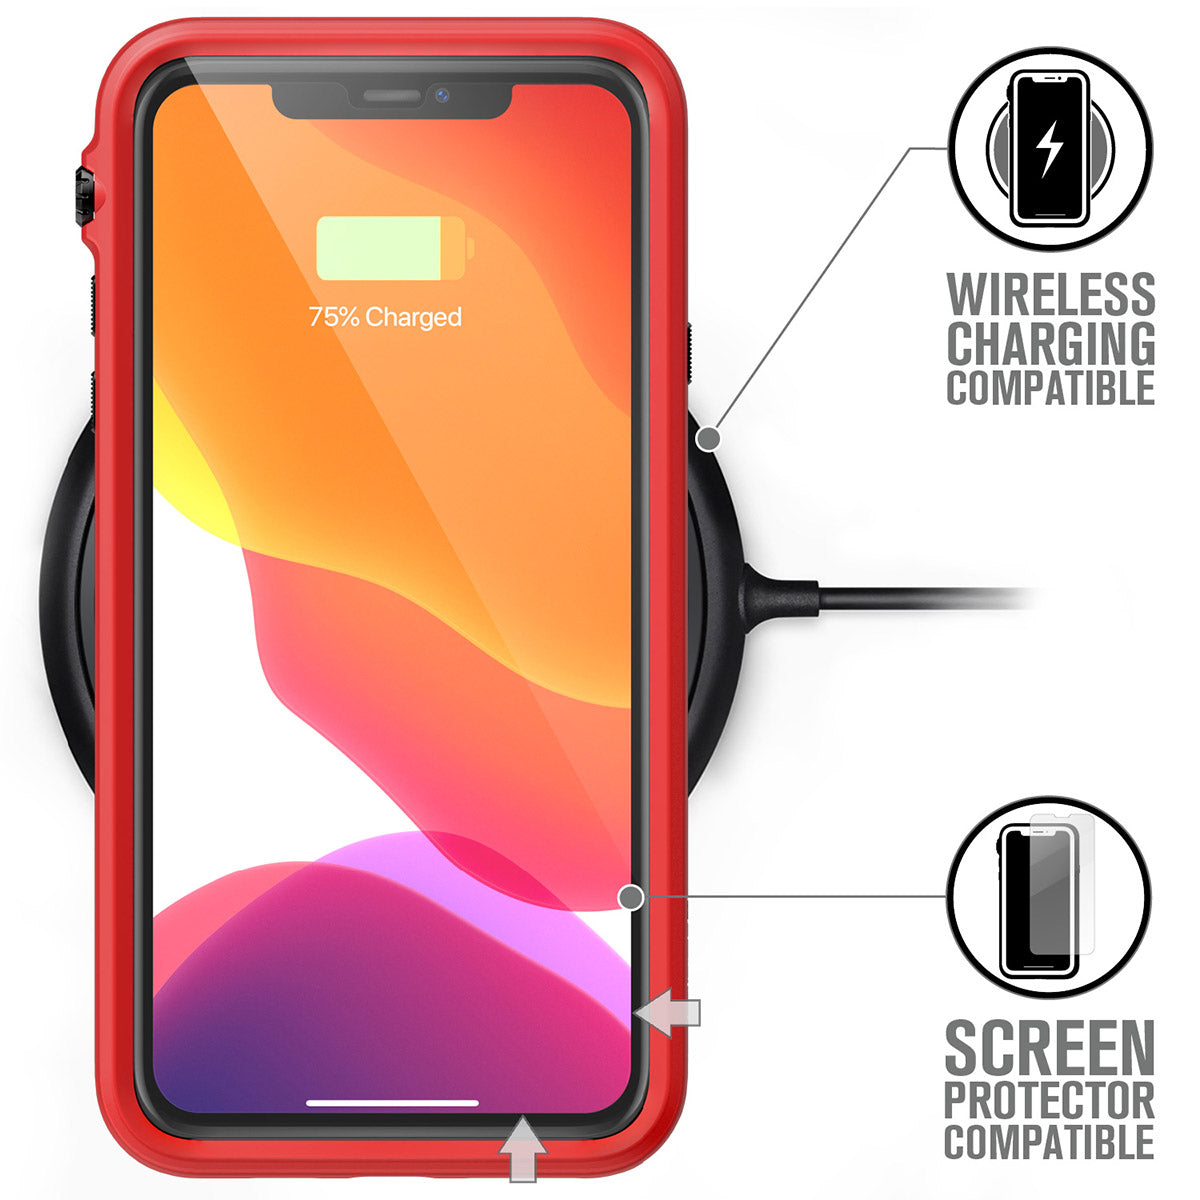 catalyst iPhone 11 series impact protection case for iphone 11 pro max flame red placed on the wireless charger 75% charged text reads wireless charging compatible screen protector compatible